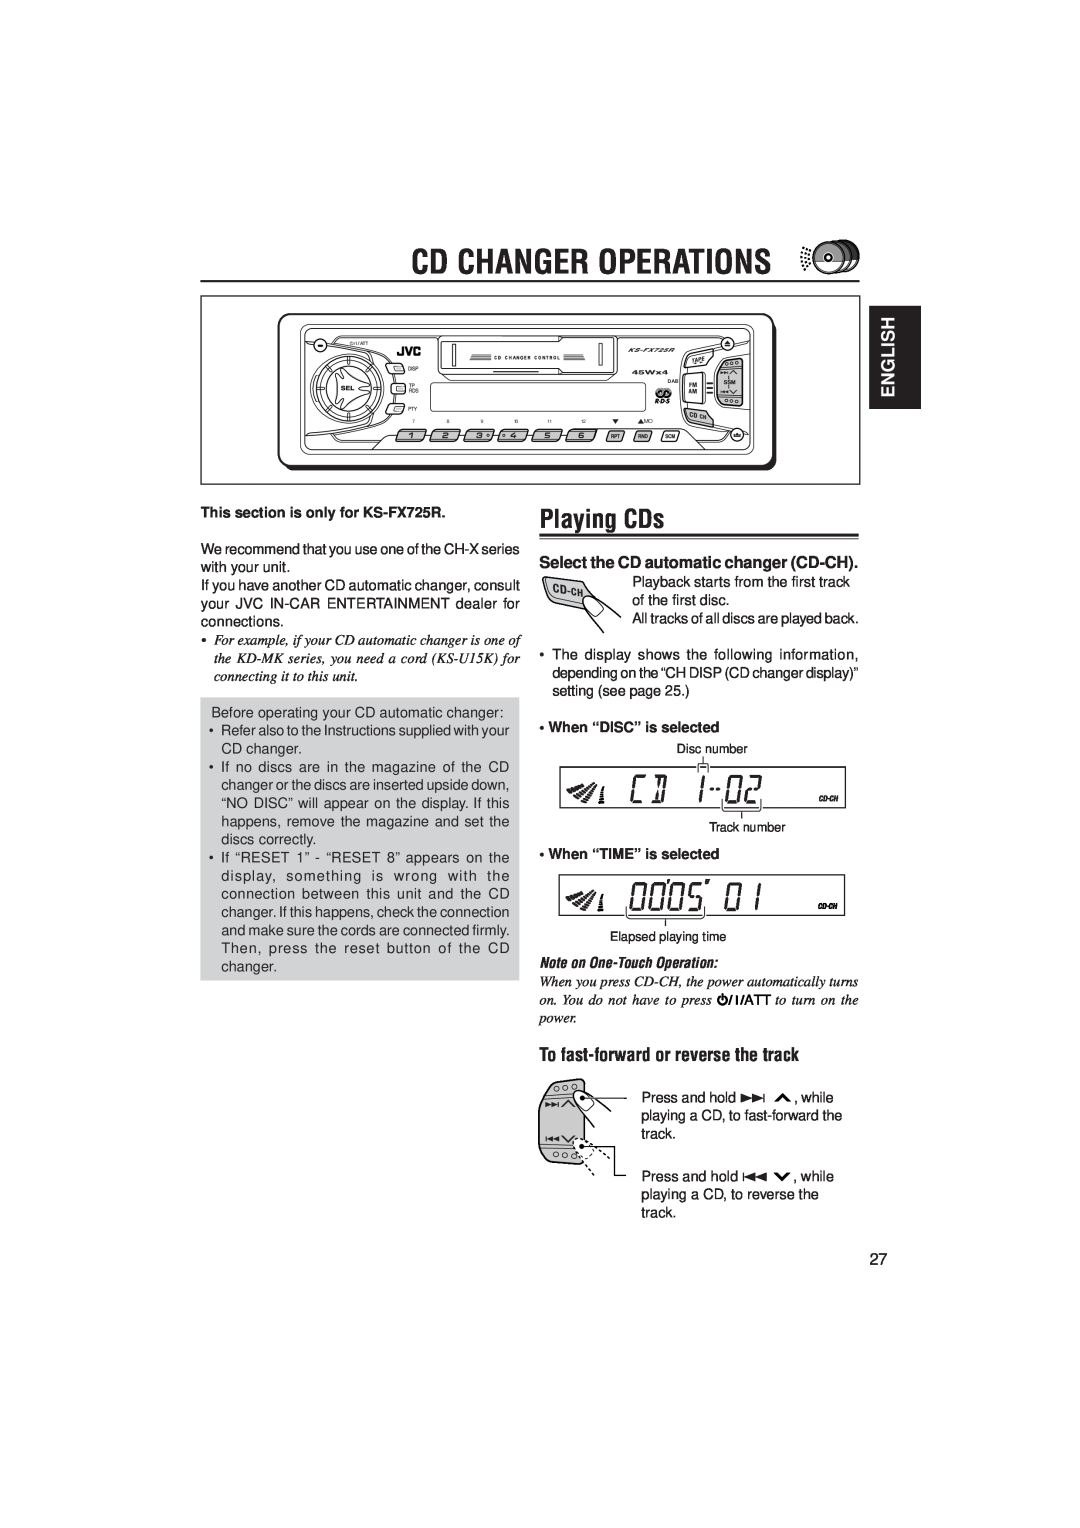 JVC KS-F525 Cd Changer Operations, Playing CDs, English, Select the CD automatic changer CD-CH, When “DISC” is selected 